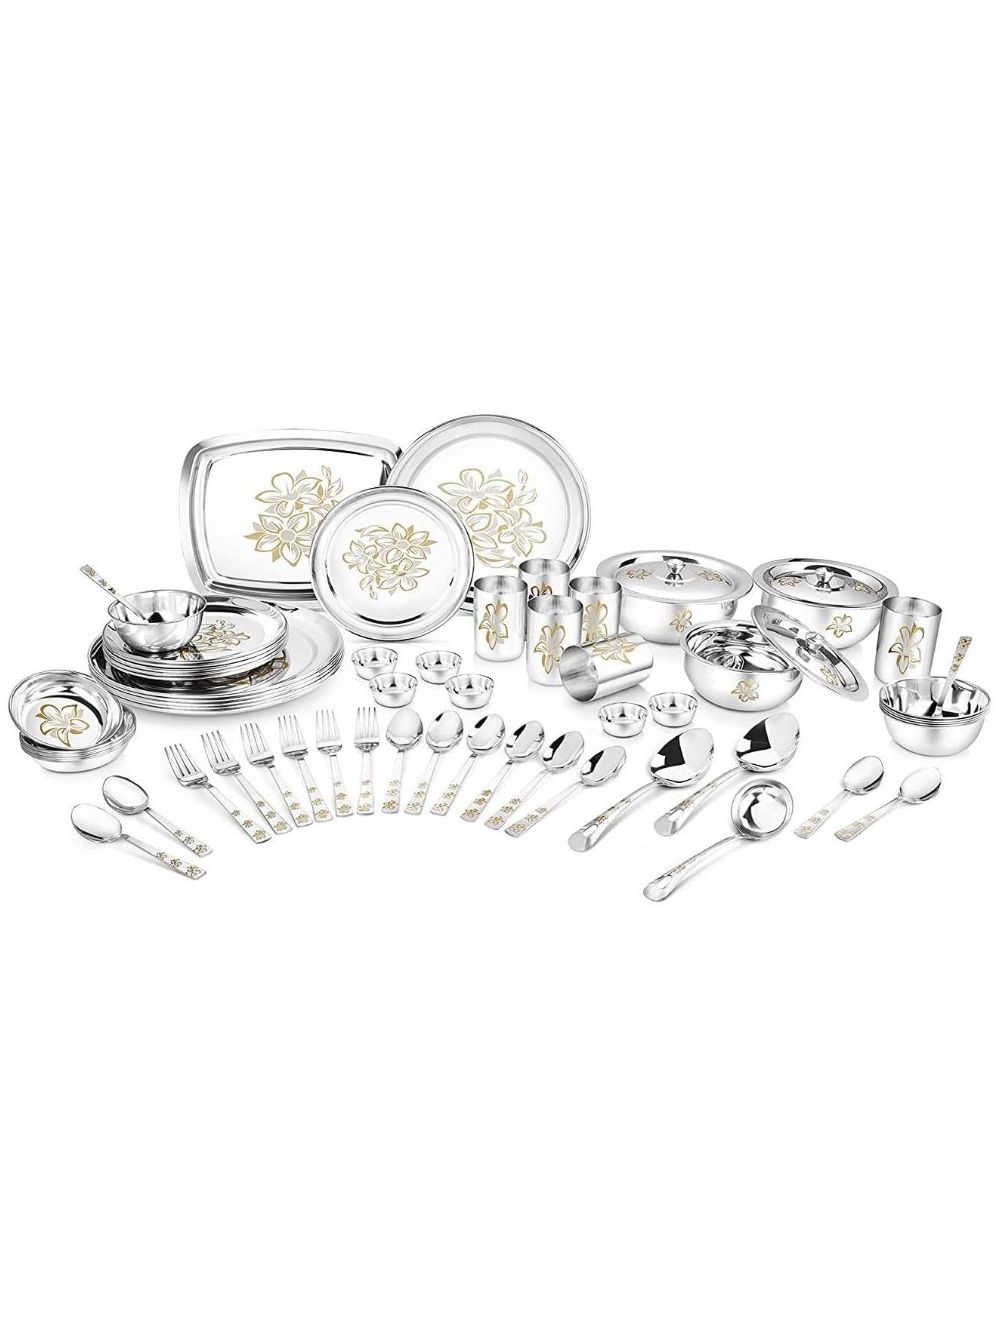 Classic Essentials 61 pcs Stainless Steel with Permanent Glory Laser Design Dinner Set-CE-SVG61